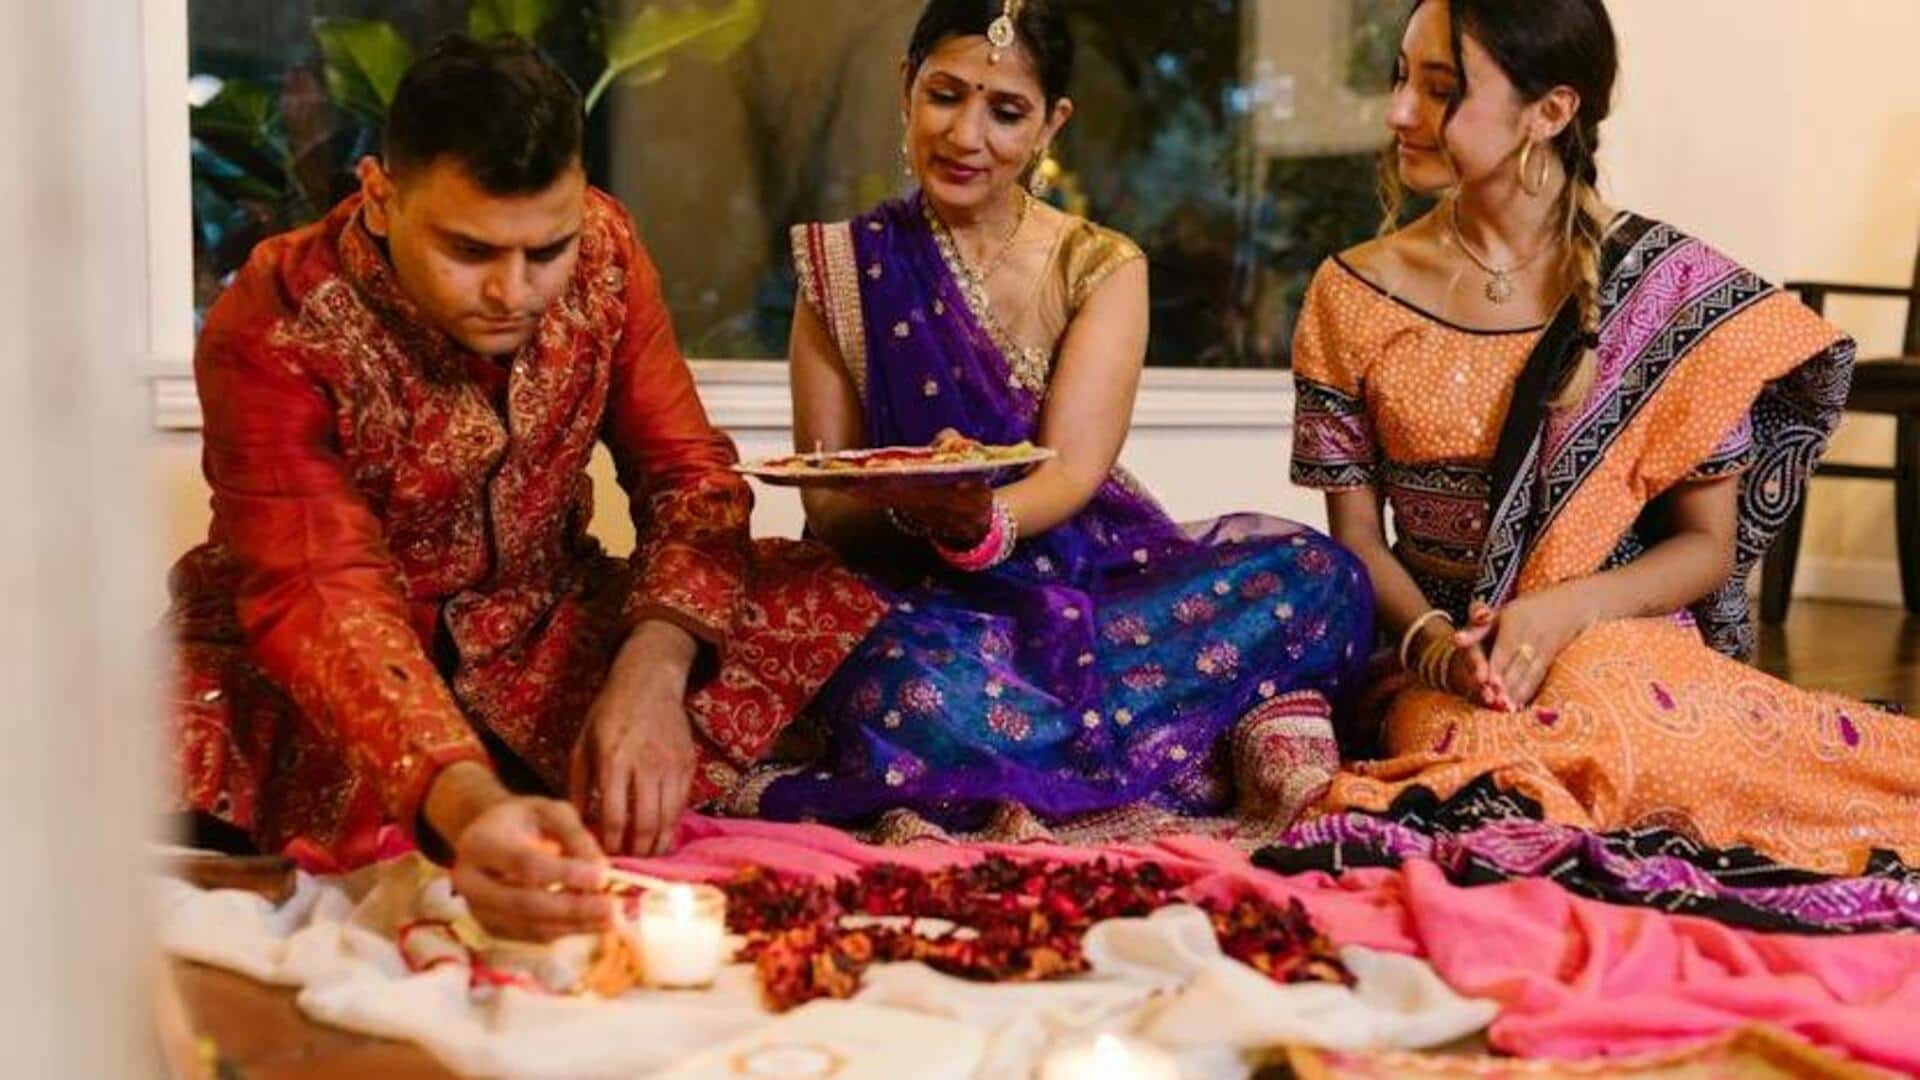 How to celebrate a sustainable Diwali this year